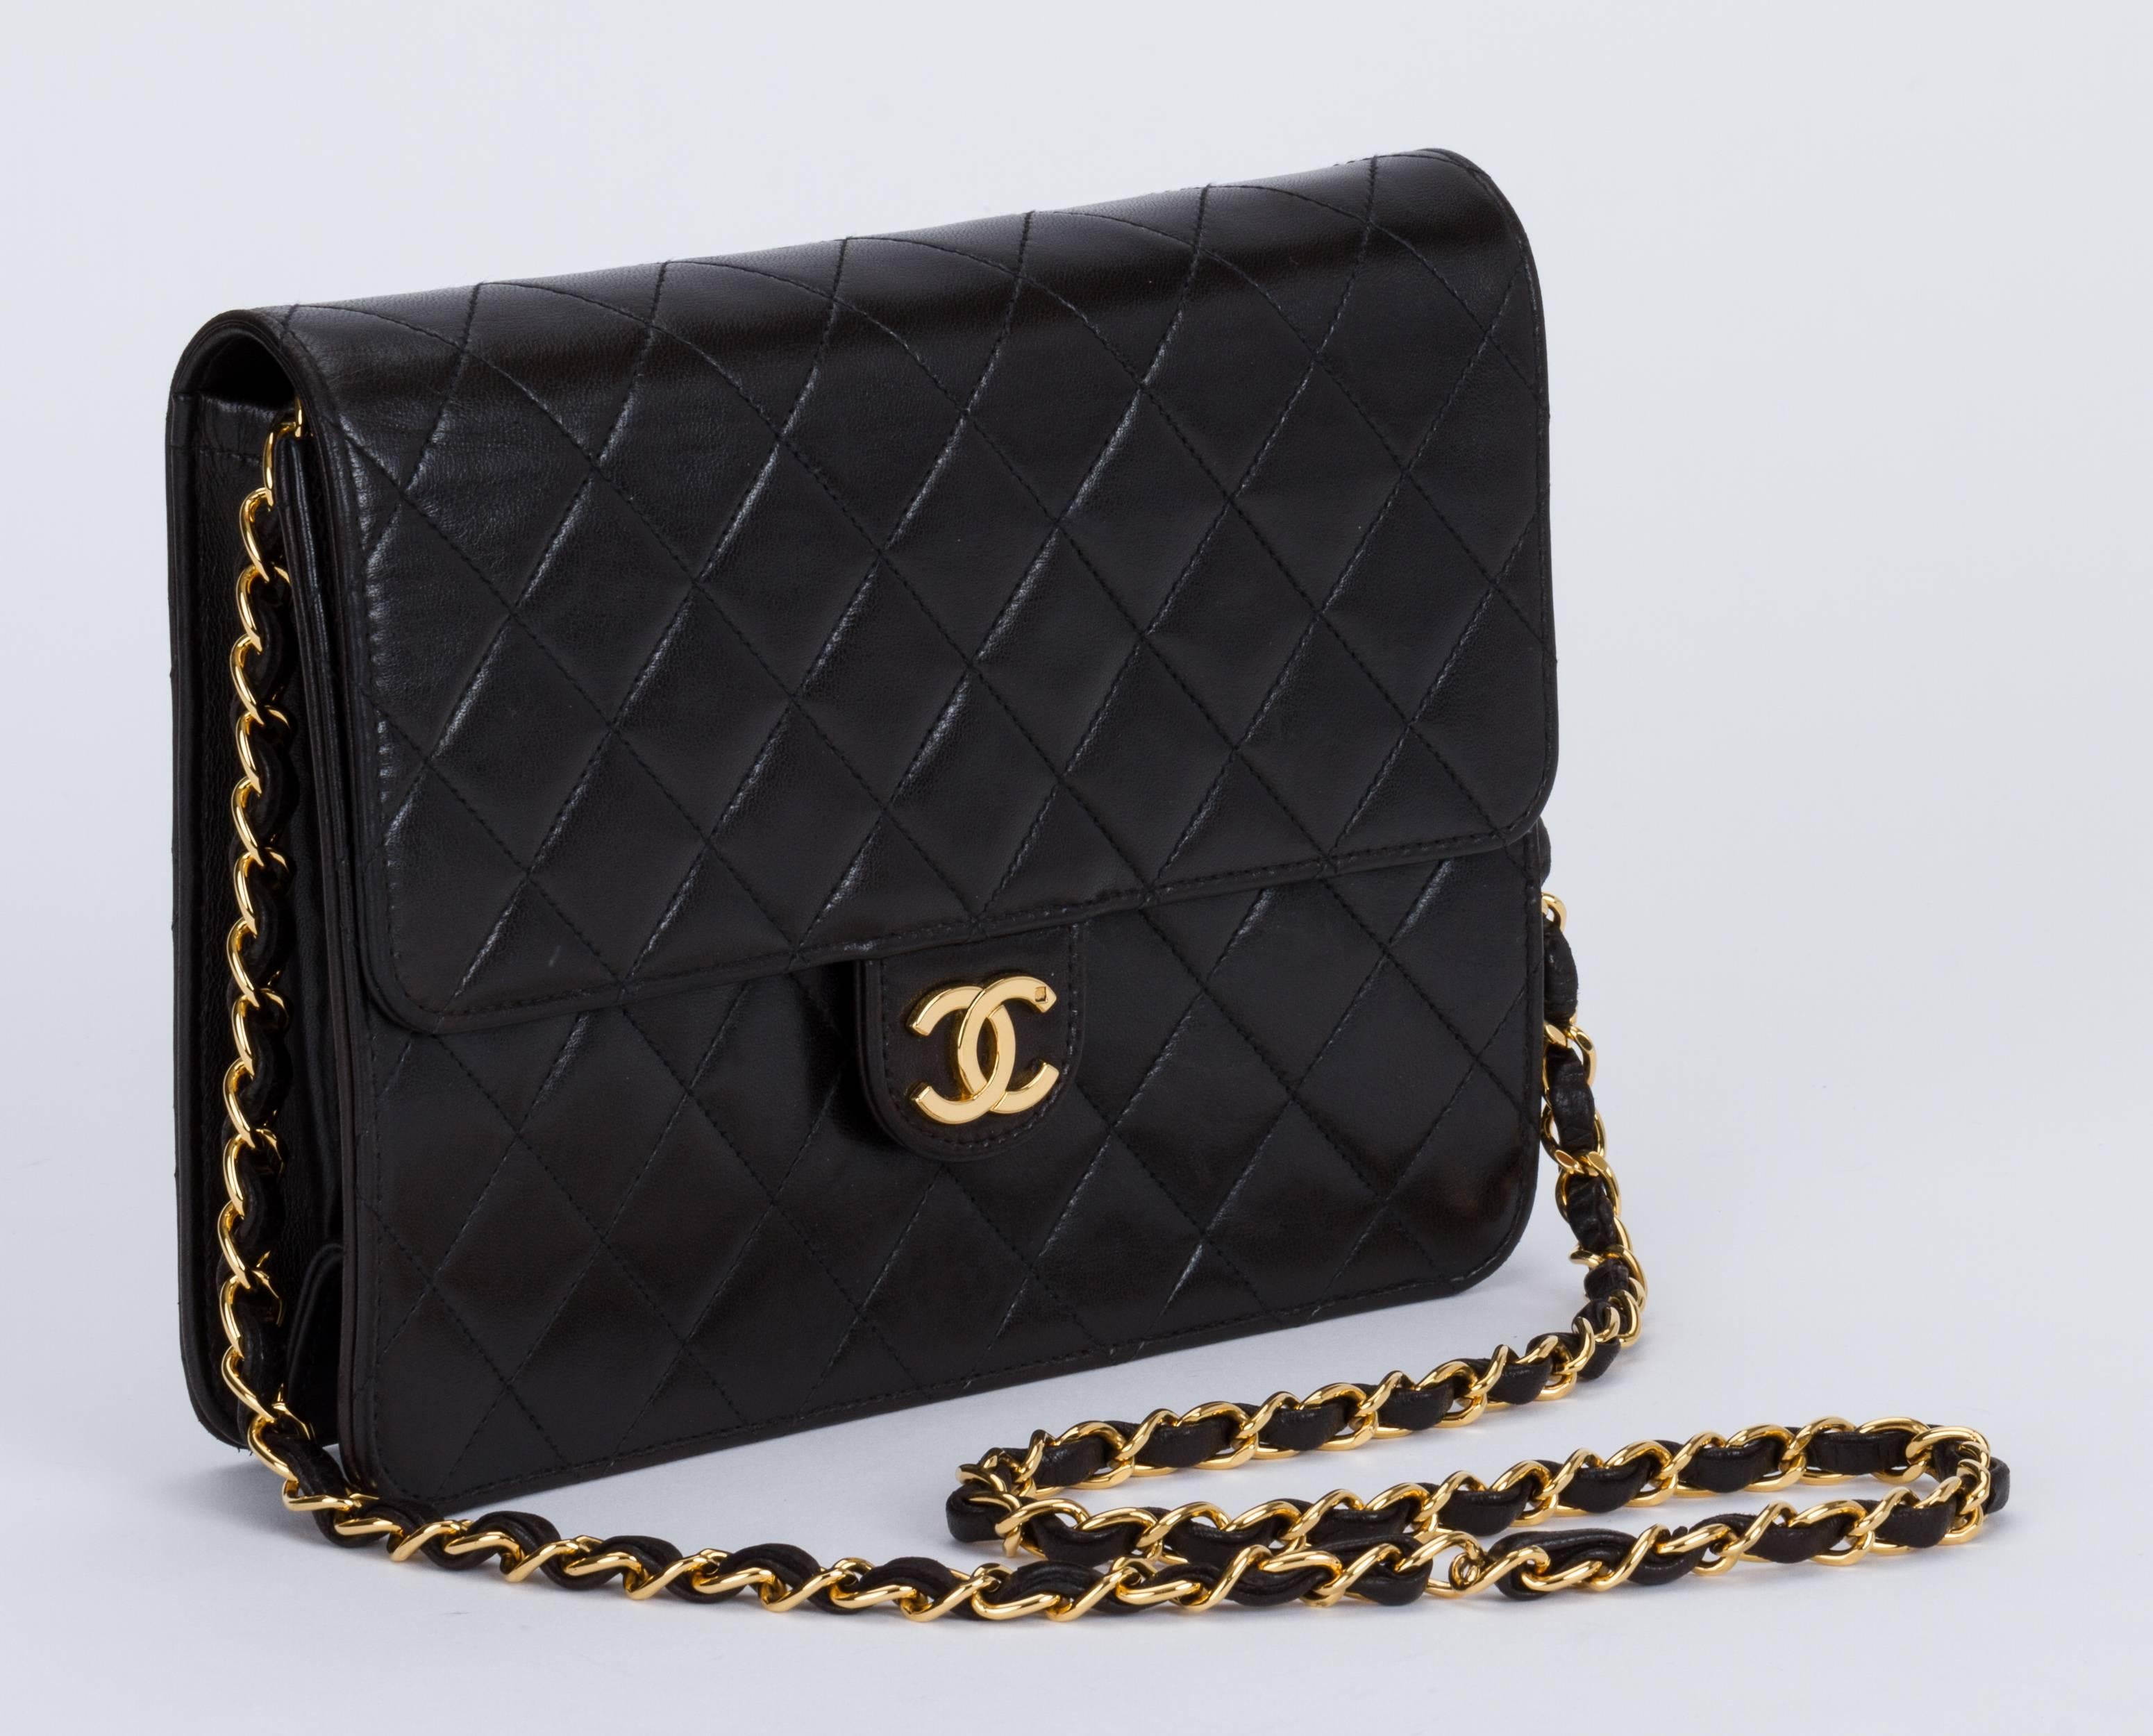 Chanel black lambskin 2 way handbag. Can be worn as a clutch or as a shoulder bag. Collection 2000/2002. Comes with hologram, id card and dust cover.
